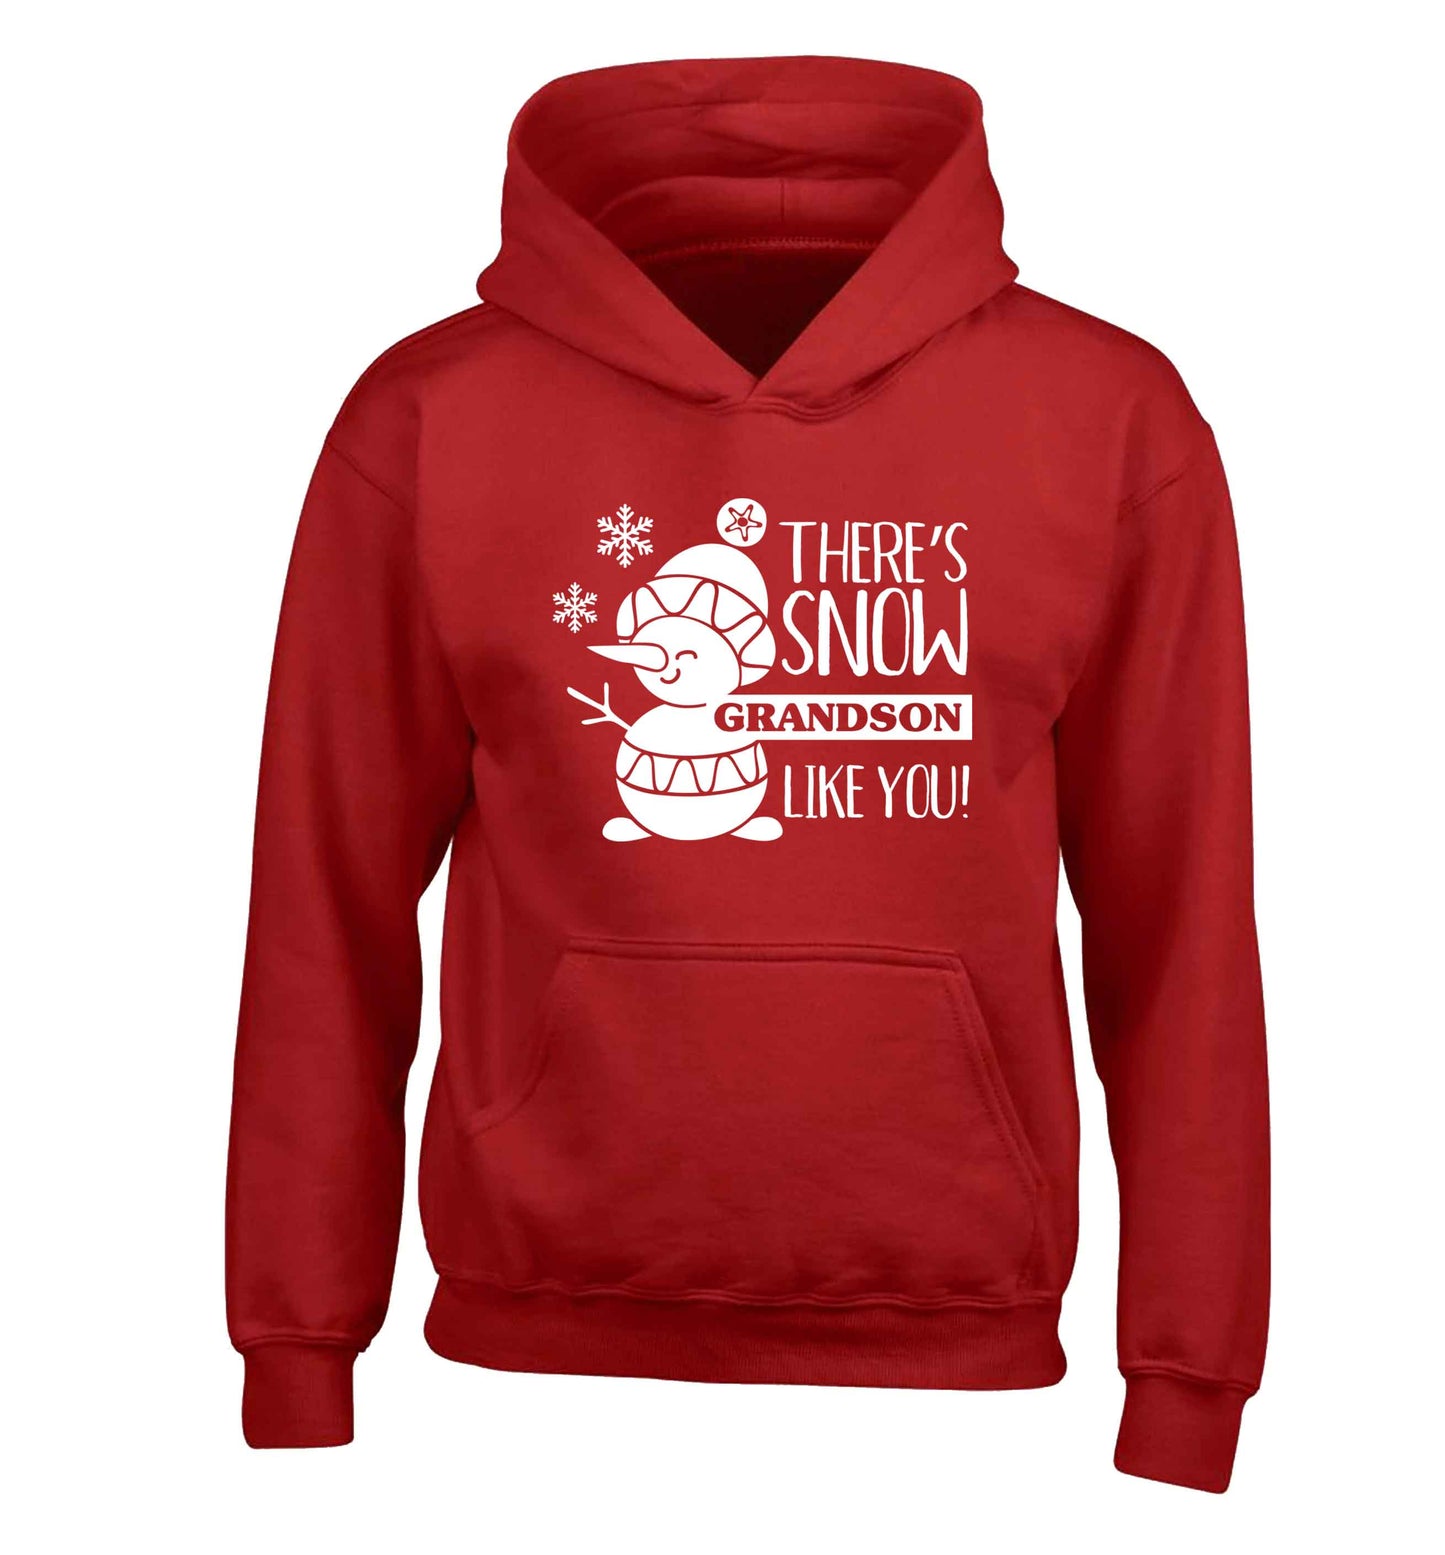 There's snow grandson like you children's red hoodie 12-13 Years